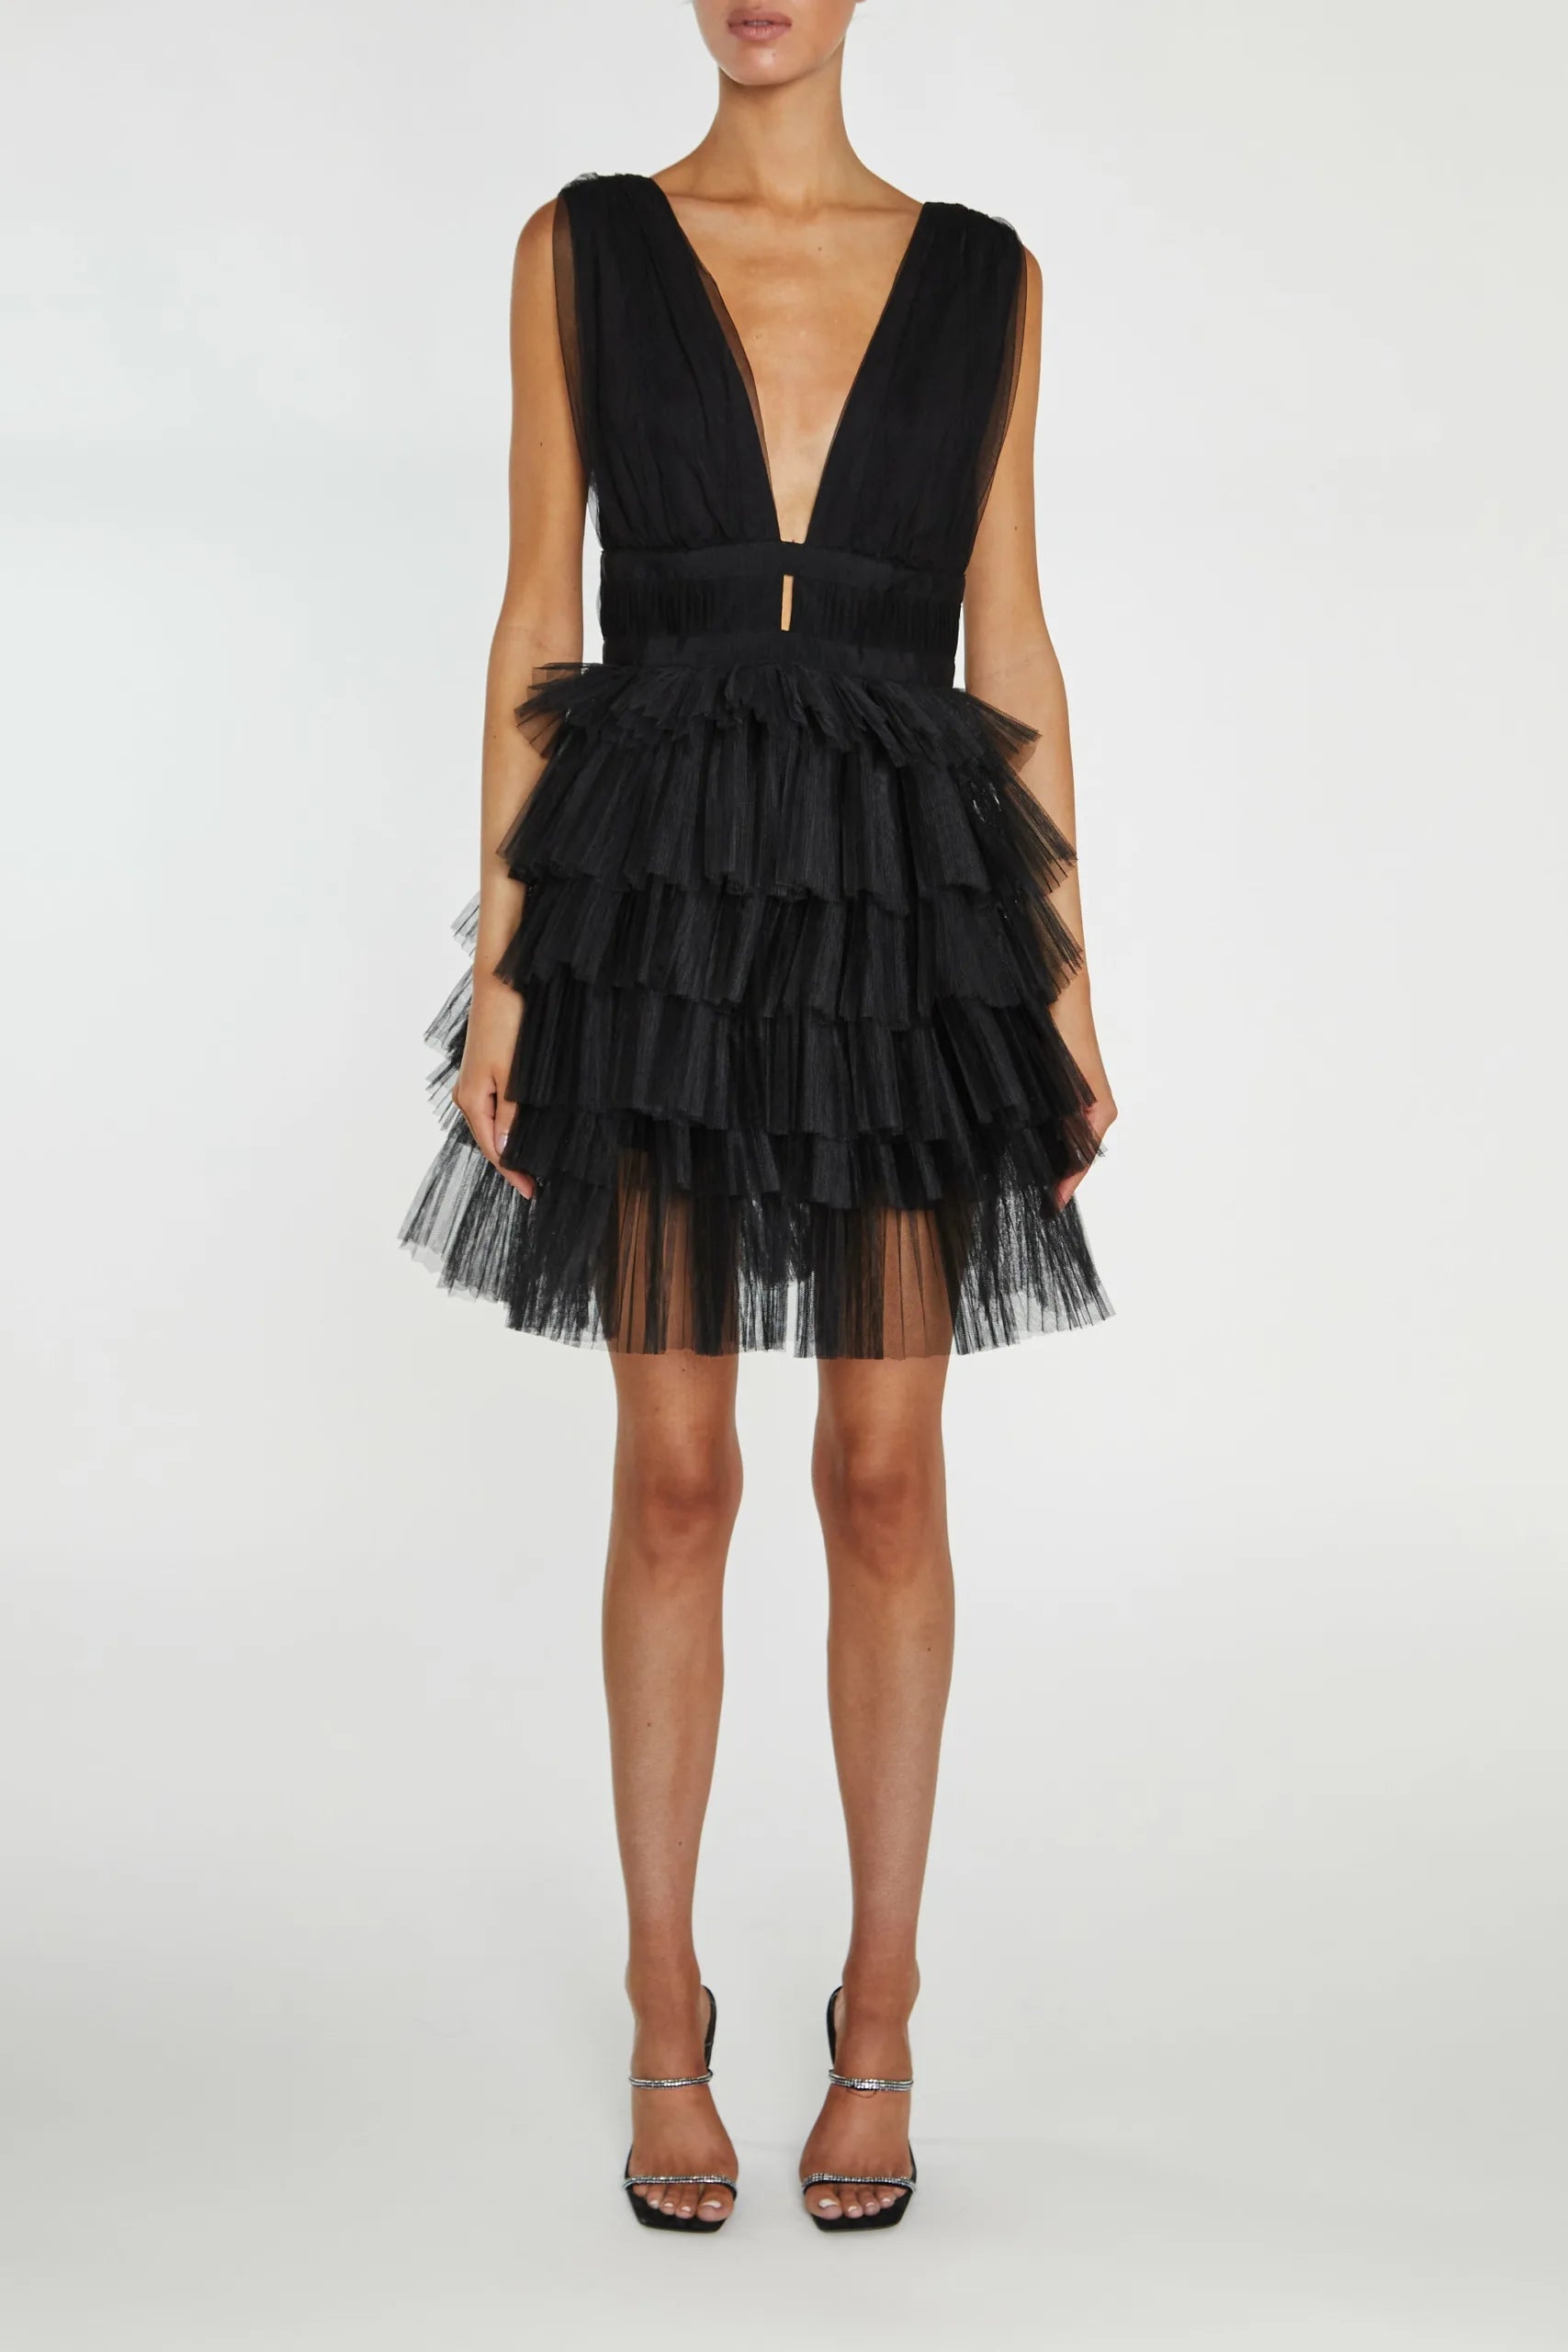 True Decadence Elle Black Plunge Front Tiered Tulle Mini Dress